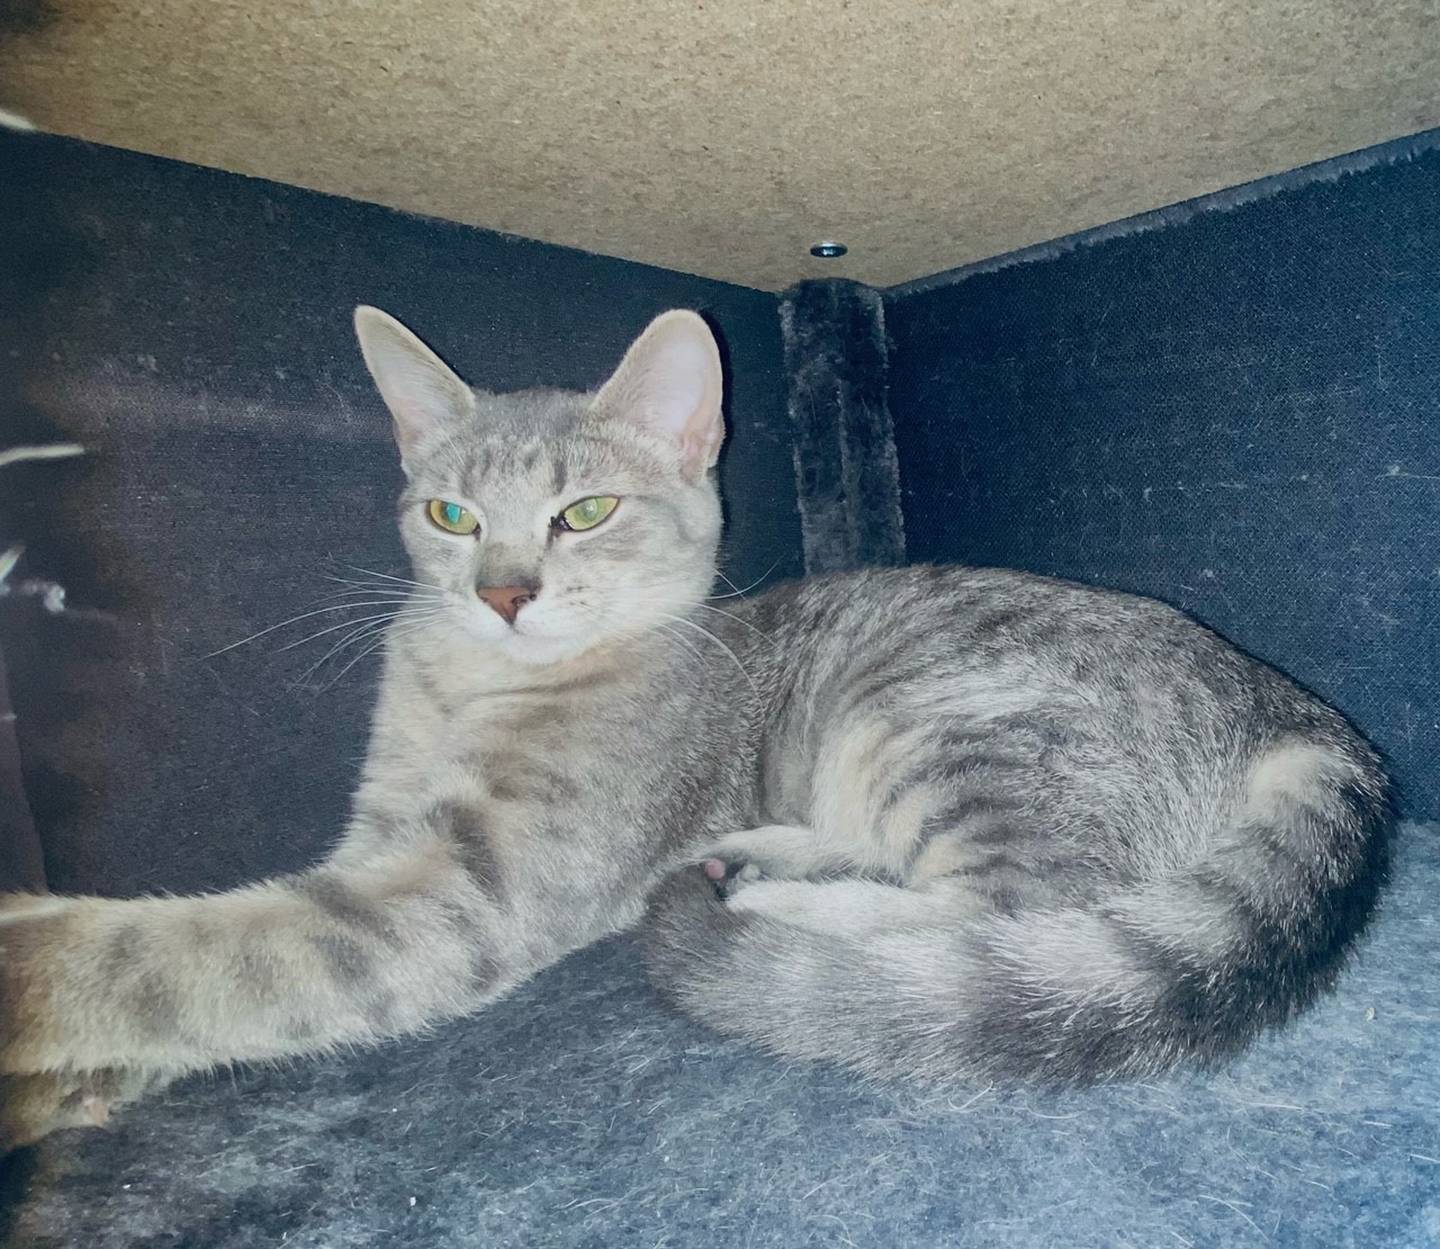 Sweetie is a 6- month-old domestic female. She is kindhearted, gentle, and shy. Sweetie appreciates her alone time and is fond of relaxing in her bed. For more information on Sweetie, contact Forepaws at megan@forepawspets.com. Visit https://www.forepawspets.com/.